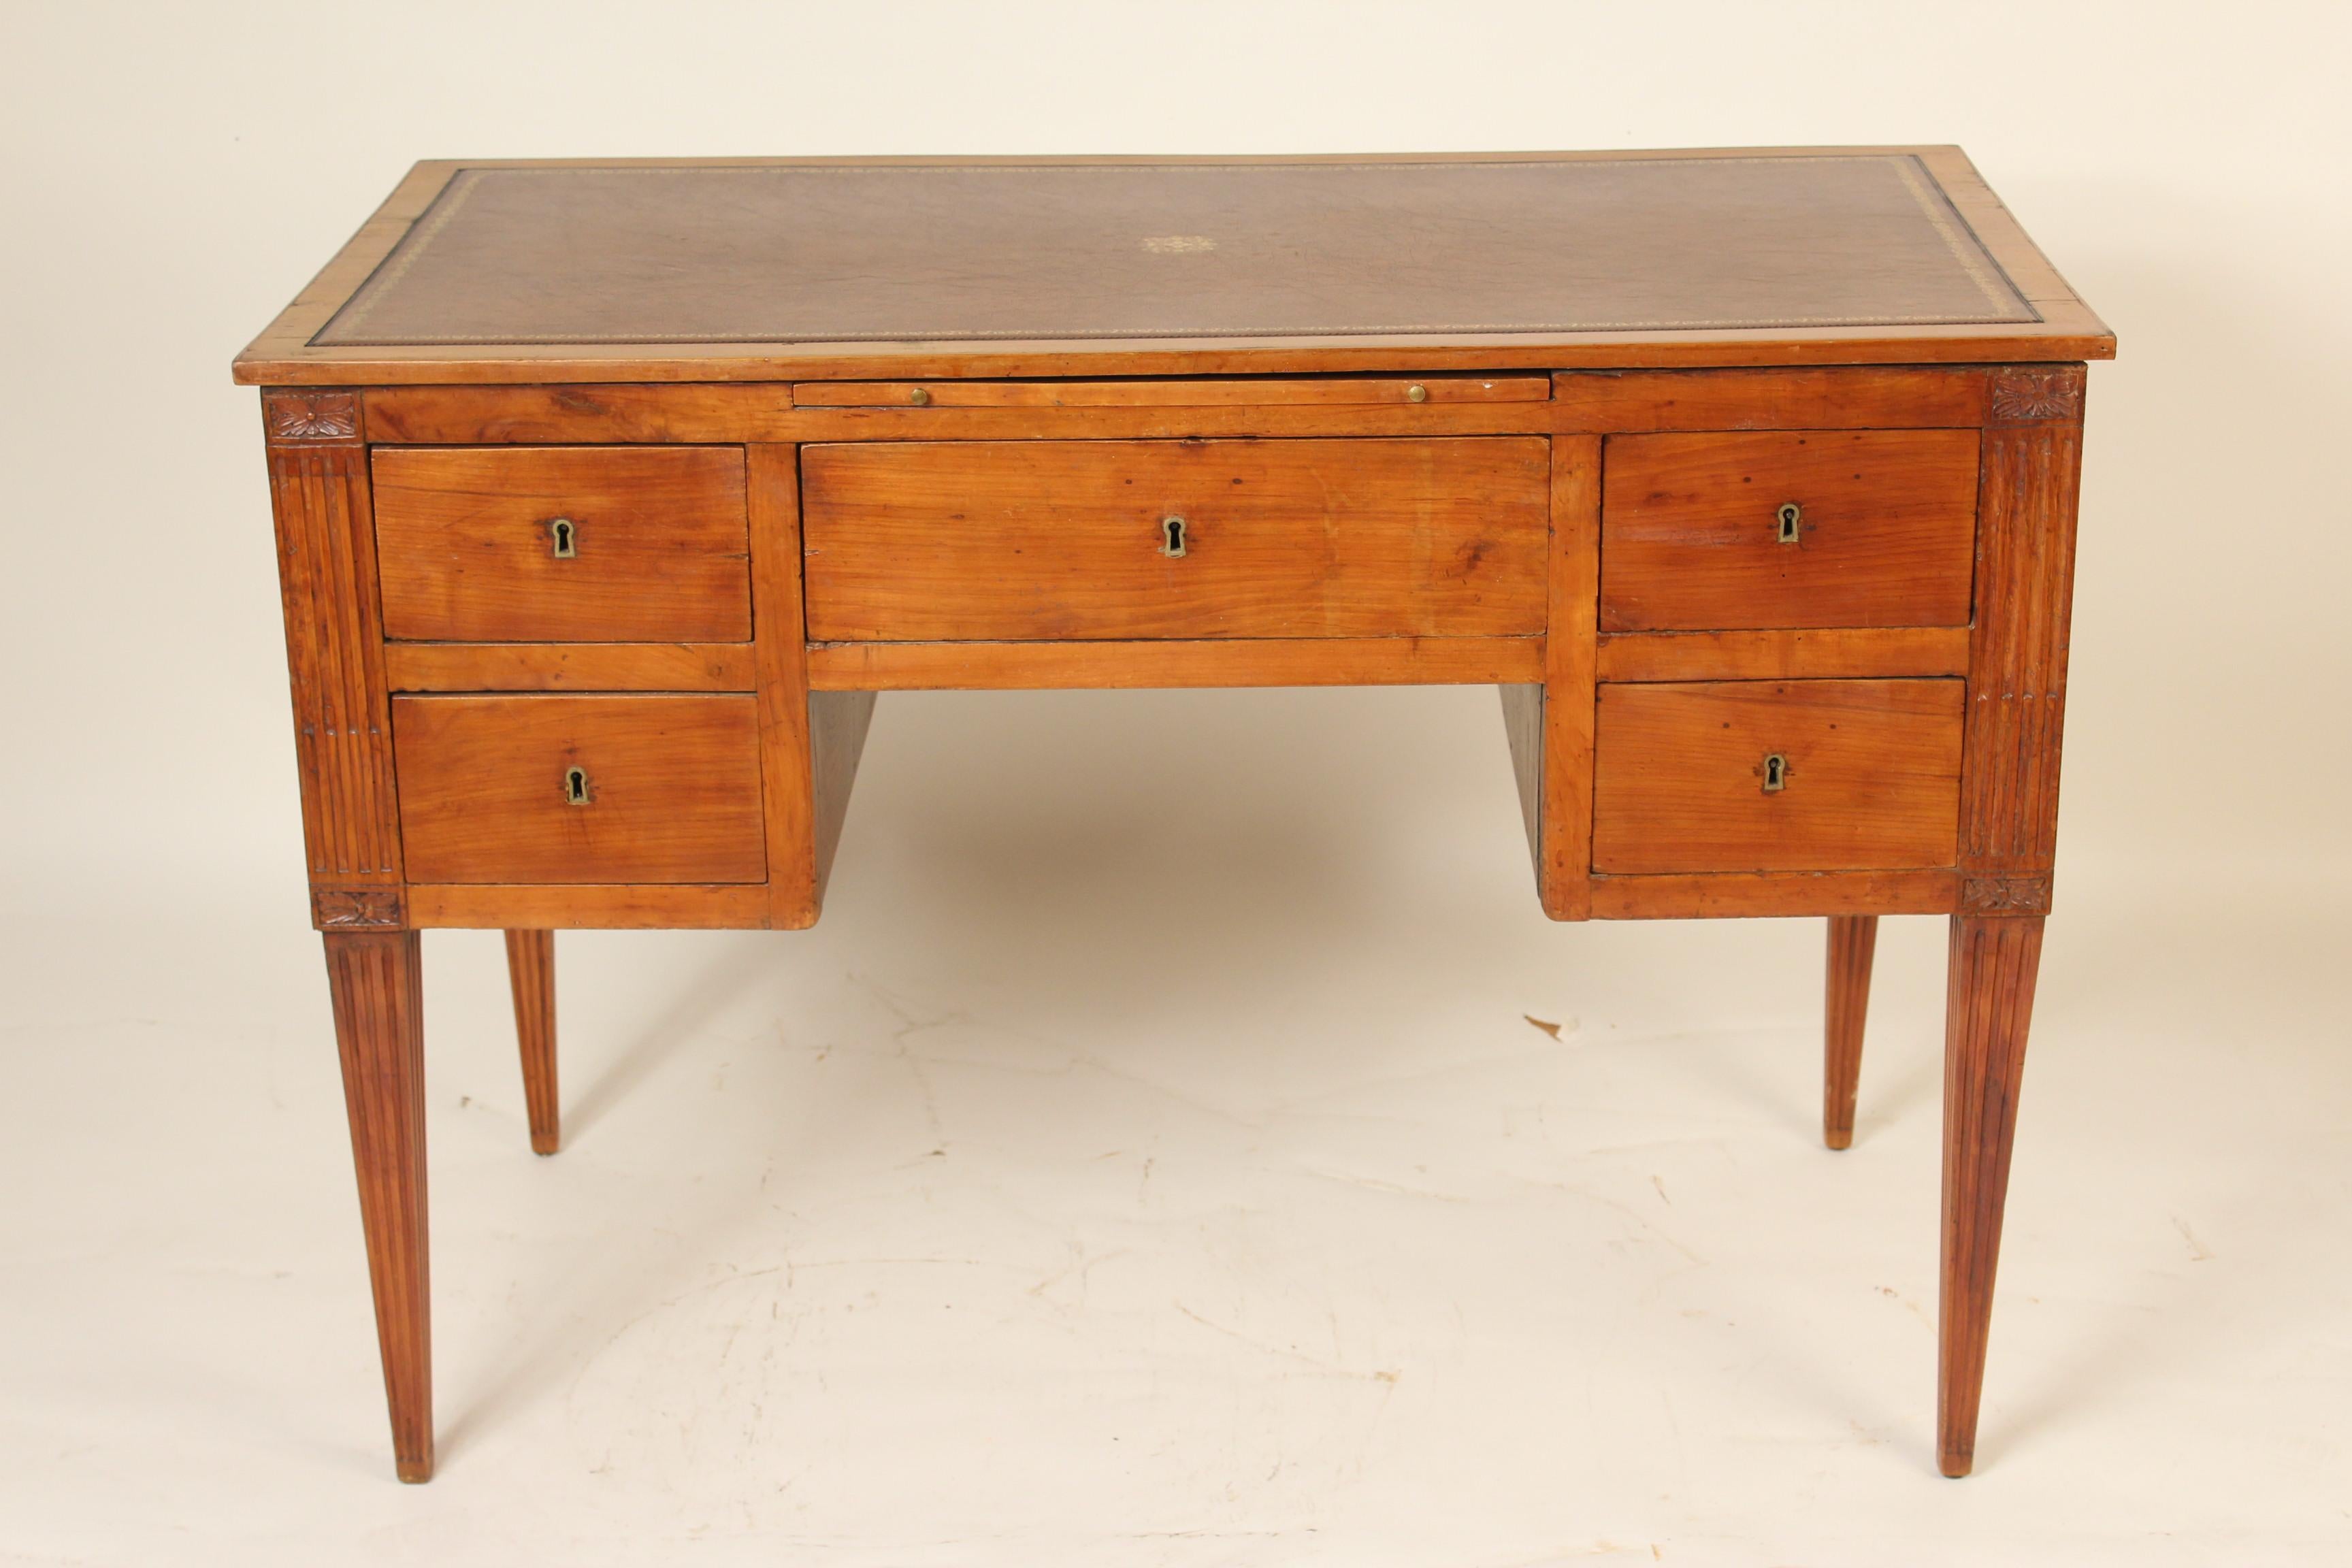 Continental neoclassical fruitwood desk, 19th century, with a 21st century tooled leather top. This desk has excellent old fruitwood color. Drawers have dove tail construction. There is a tooled leather writing slide that pulls out.